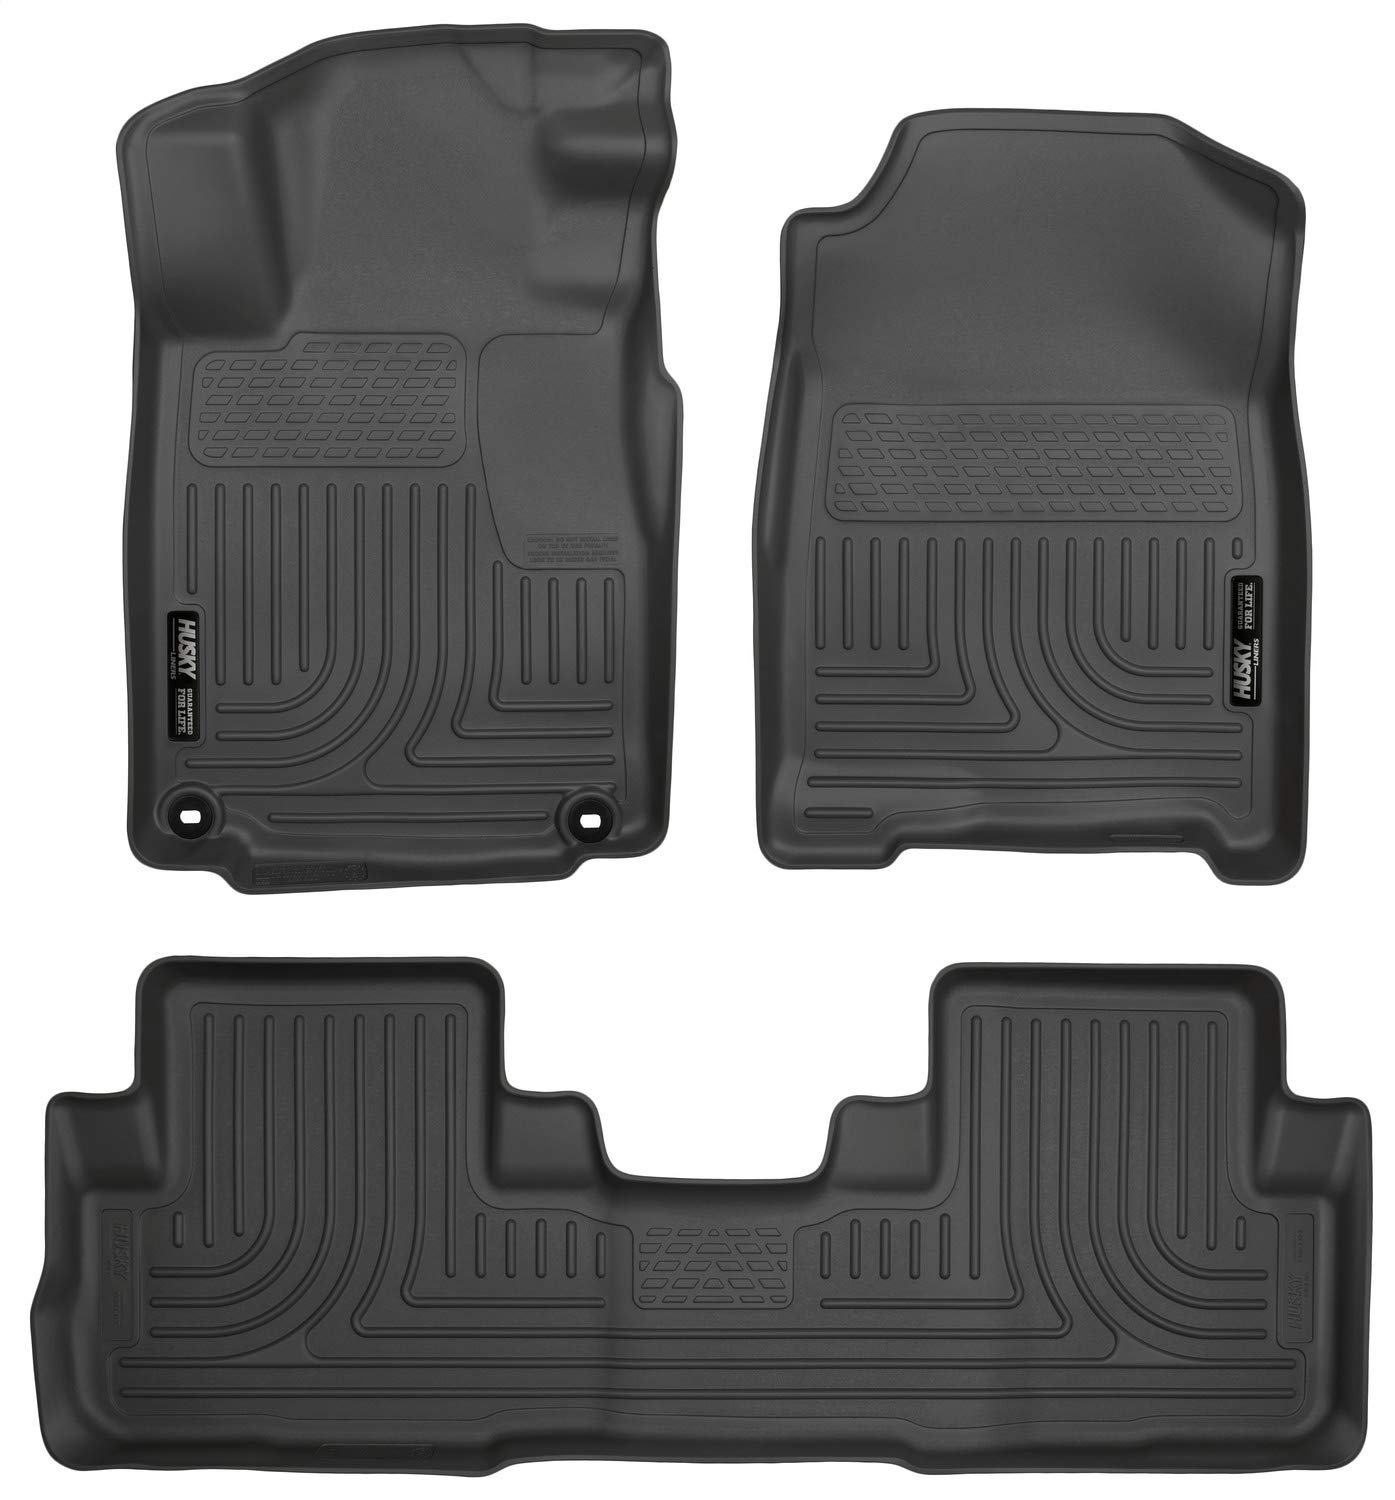 16-16 CRV FITS ALL MODELS. FRONT & 2ND SEAT FLOOR LINERS (FOOTWELL COVERAGE) WEA